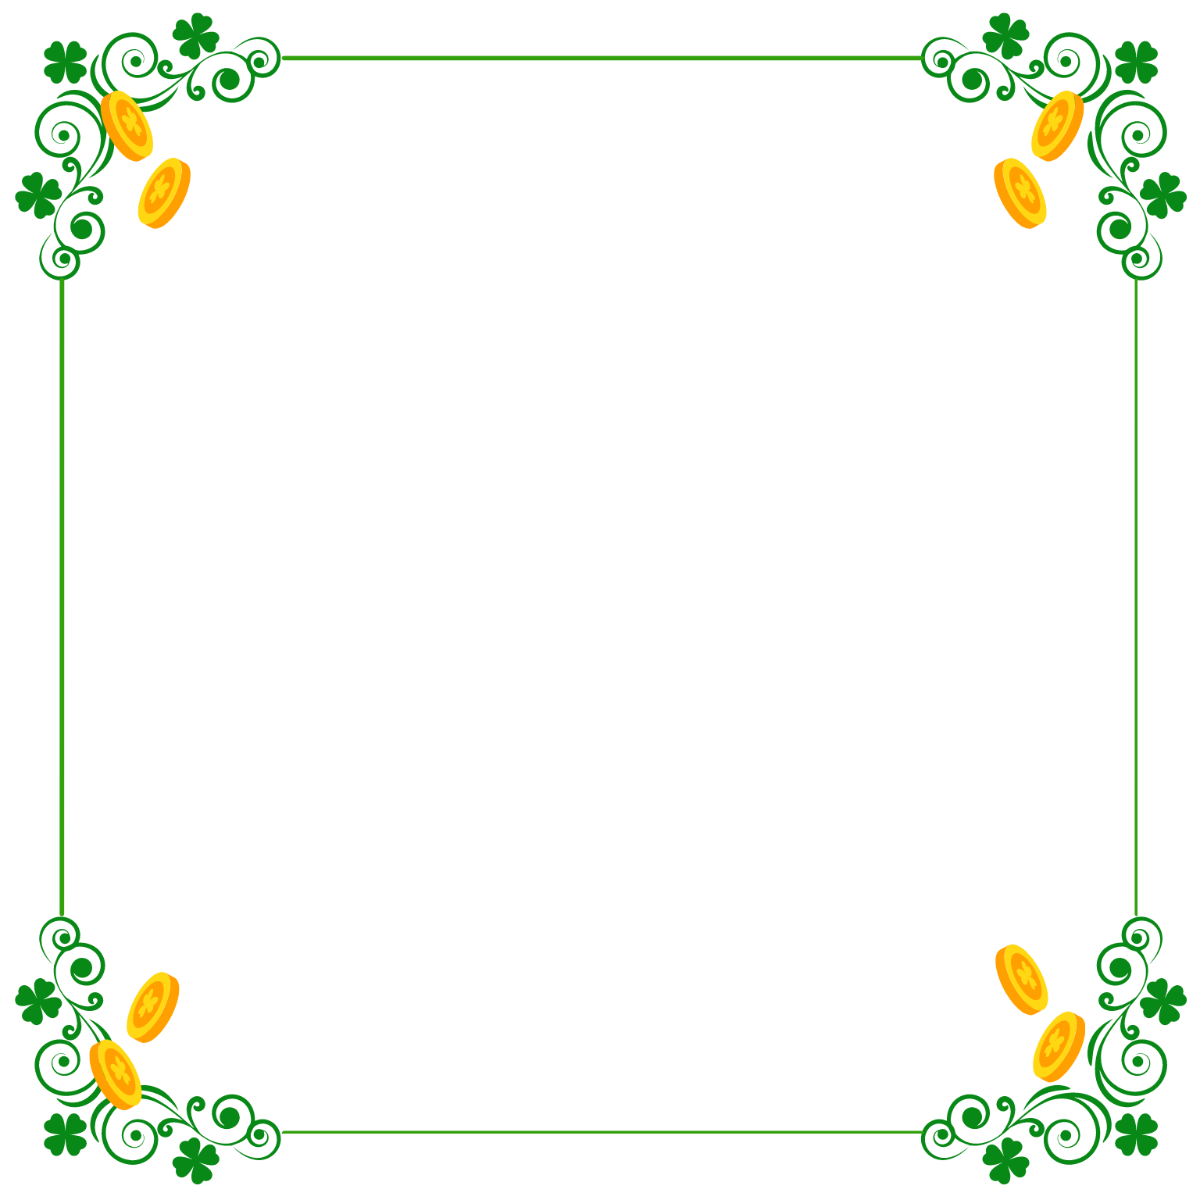 Free St. Patrick's Day Border Vector Template